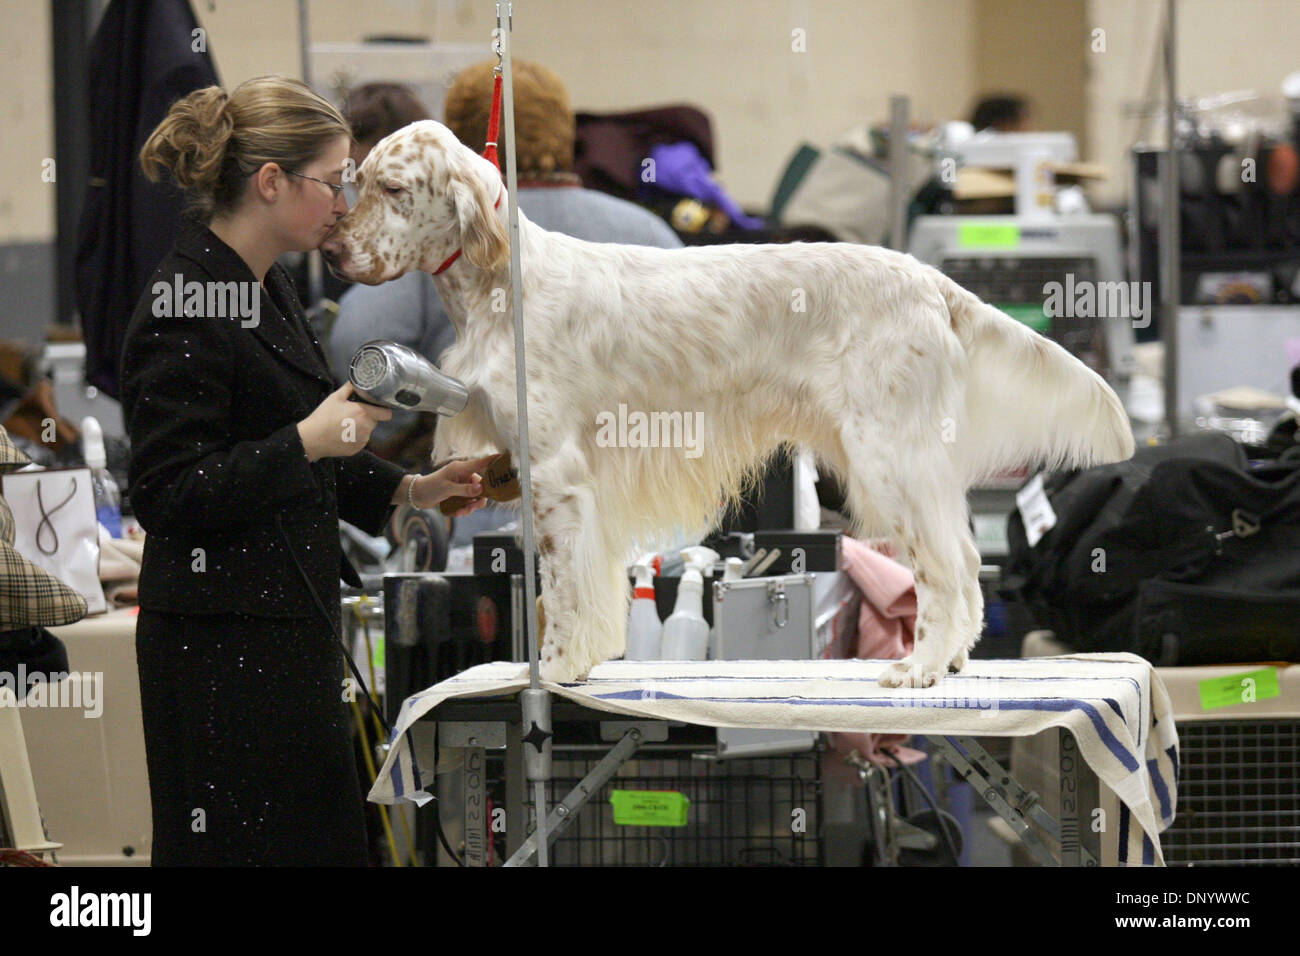 Page 6 - Danny Dog High Resolution Stock Photography and Images - Alamy